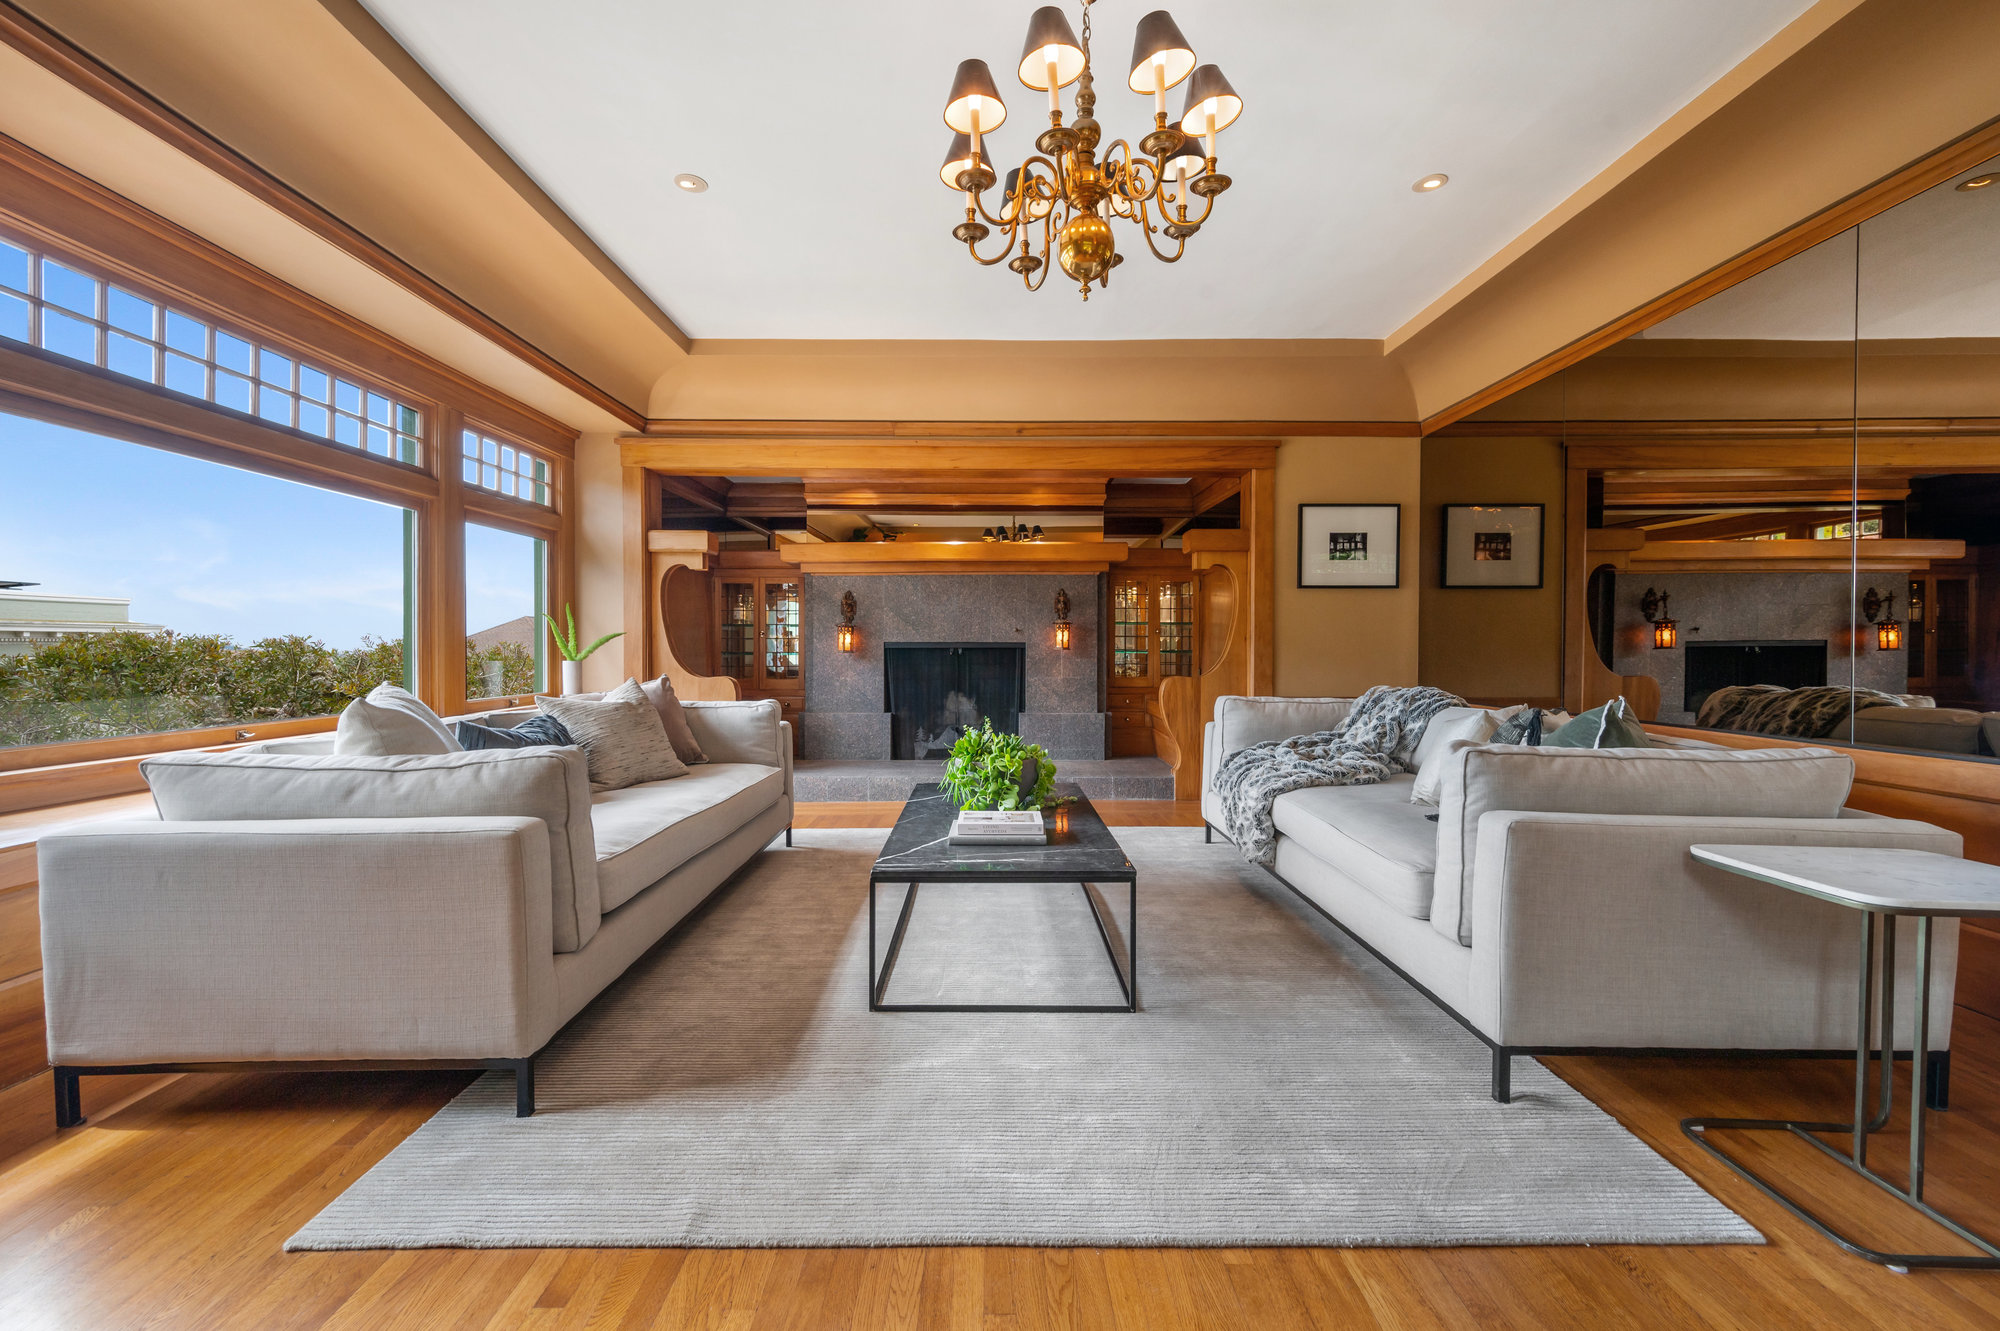 Property Photo: Living room featuring rich Craftsman architectural elements and woodwork